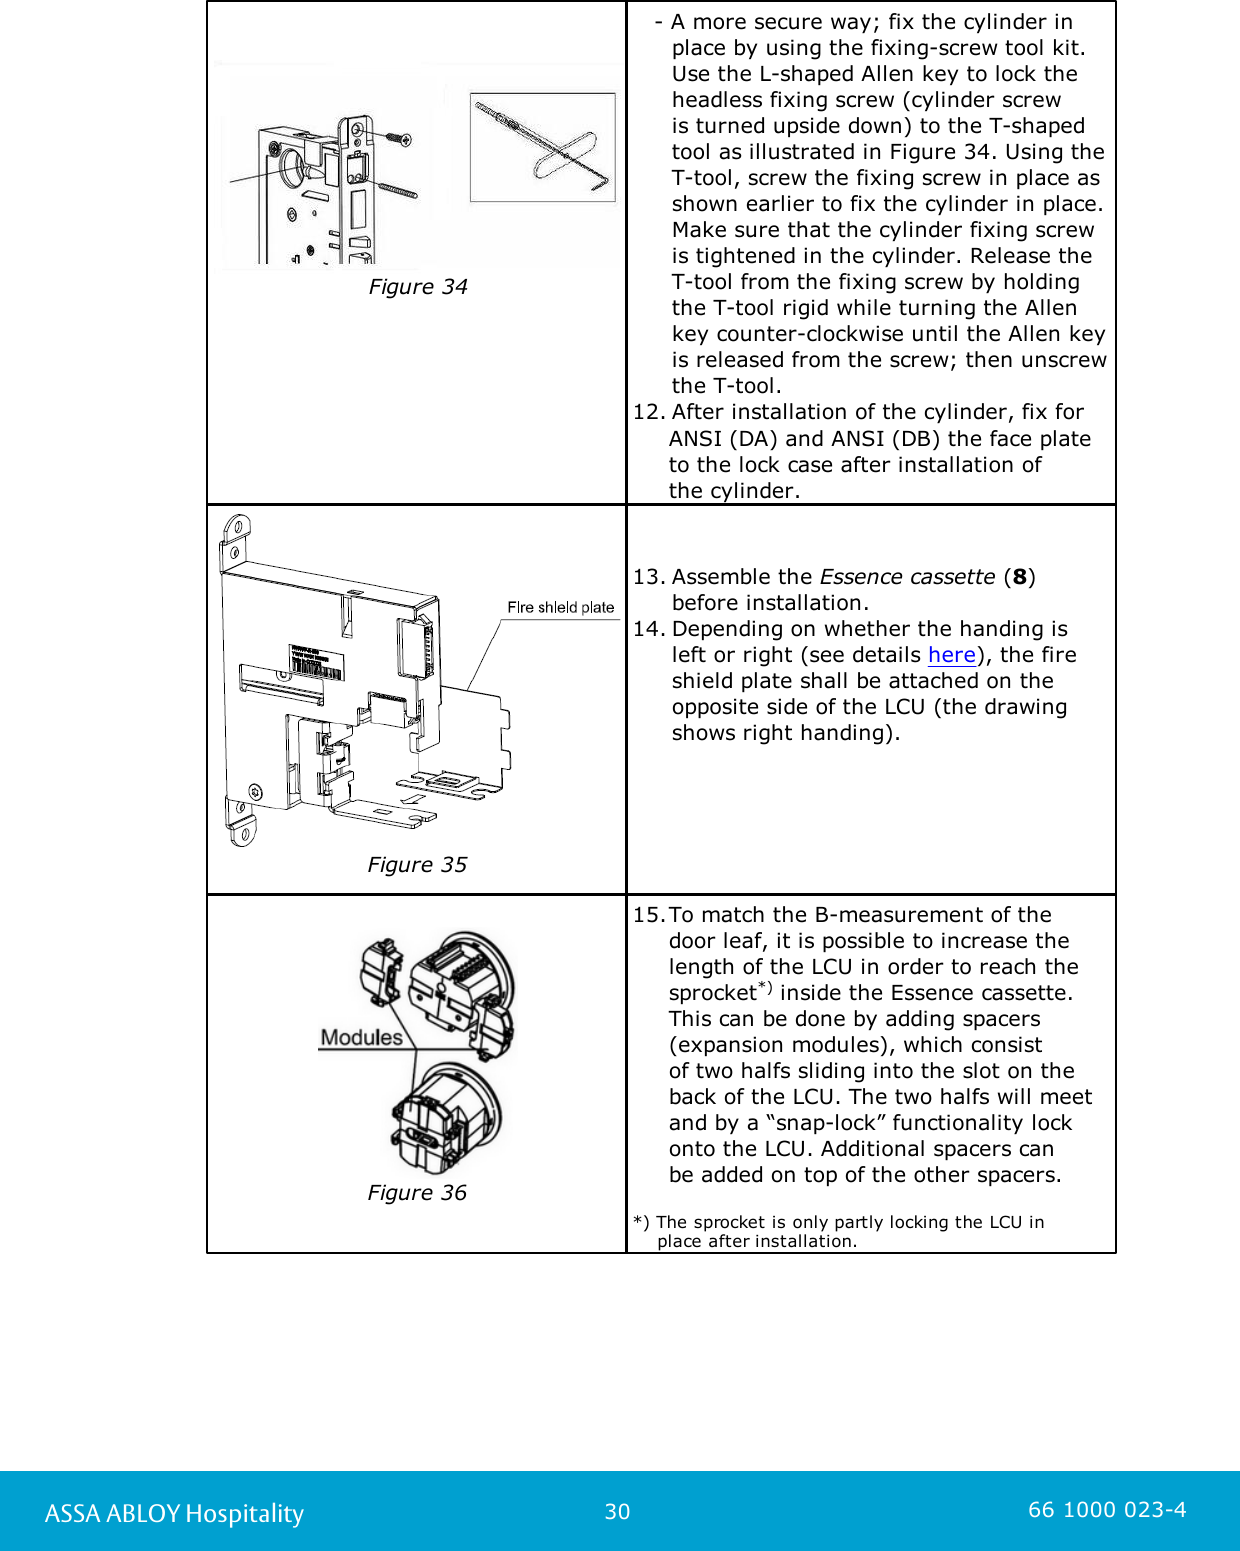 30ASSA ABLOY Hospitality 66 1000 023-4Figure 34                    - A more secure way; fix the cylinder in place by using the fixing-screw tool kit. Use the L-shaped Allen key to lock theheadless fixing screw (cylinder screw is turned upside down) to the T-shapedtool as illustrated in Figure 34. Using theT-tool, screw the fixing screw in place asshown earlier to fix the cylinder in place.Make sure that the cylinder fixing screwis tightened in the cylinder. Release theT-tool from the fixing screw by holdingthe T-tool rigid while turning the Allenkey counter-clockwise until the Allen keyis released from the screw; then unscrewthe T-tool. 12. After installation of the cylinder, fix for      ANSI (DA) and ANSI (DB) the face plate     to the lock case after installation of      the cylinder. Figure 3513. Assemble the Essence cassette (8) before installation.14. Depending on whether the handing is left or right (see details here), the fireshield plate shall be attached on theopposite side of the LCU (the drawingshows right handing).Figure 3615.To match the B-measurement of the door leaf, it is possible to increase thelength of the LCU in order to reach thesprocket*) inside the Essence cassette.This can be done by adding spacers(expansion modules), which consist of two halfs sliding into the slot on theback of the LCU. The two halfs will meetand by a “snap-lock” functionality lockonto the LCU. Additional spacers canbe added on top of the other spacers. *) The sprocket is only partly locking the LCU in     place after installation.